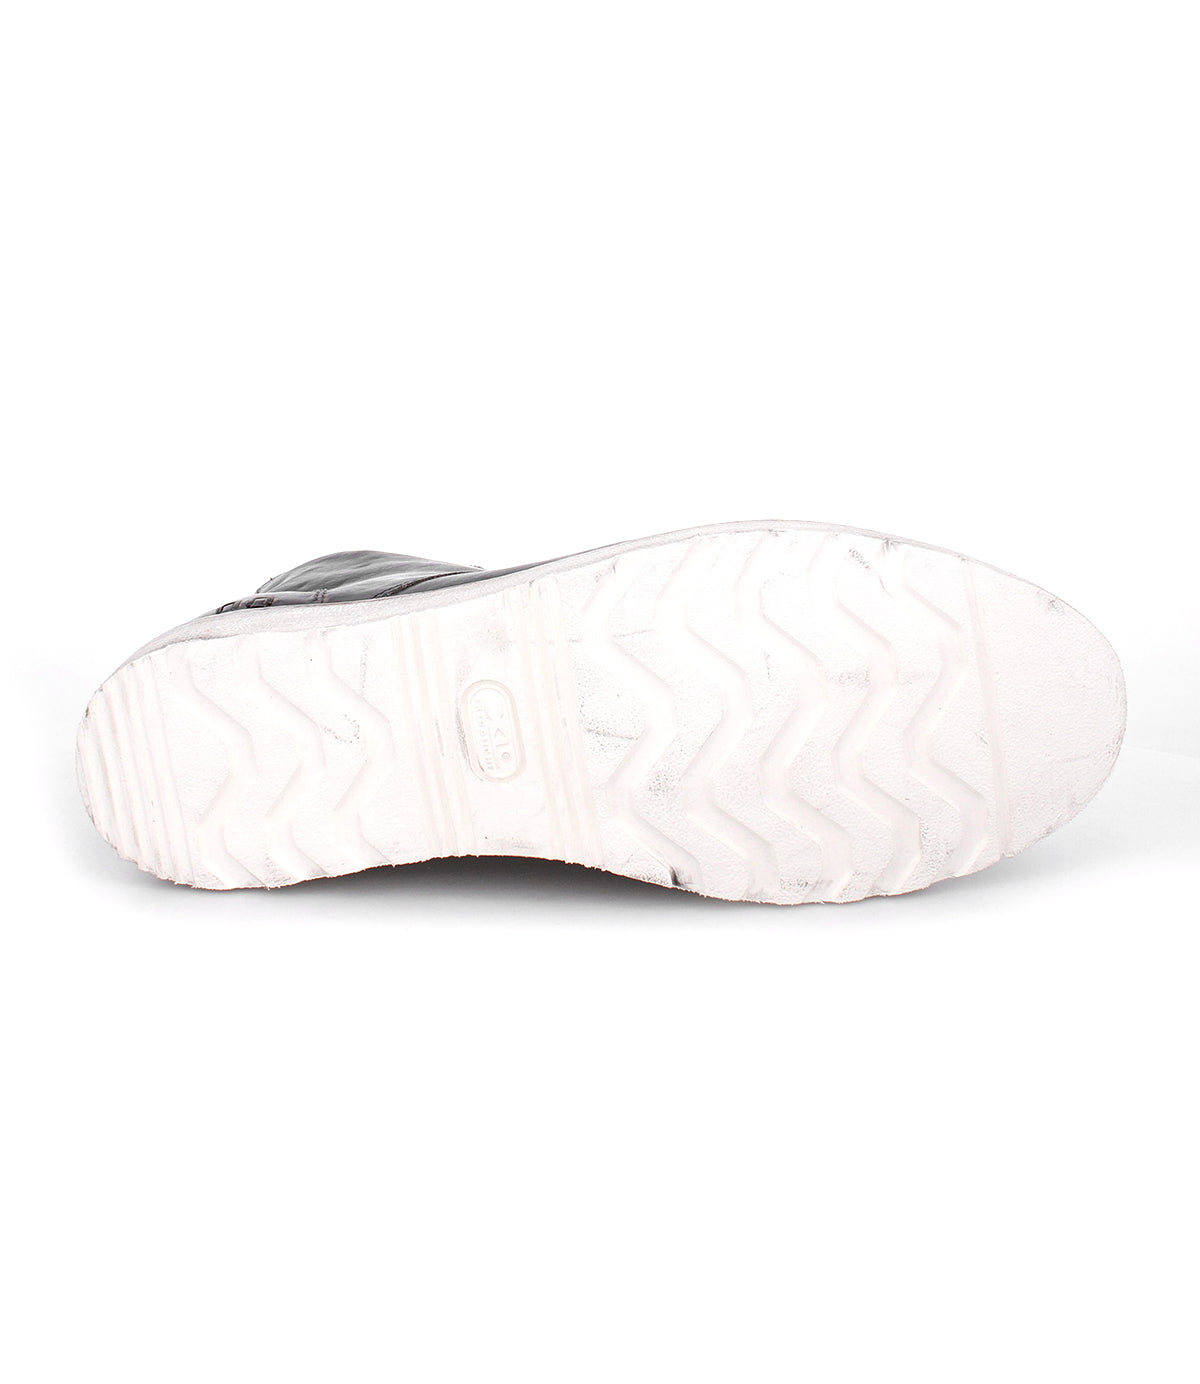 Sole of a men's leather boot with zigzag tread pattern and visible Bed Stu logo, displayed against a plain white background.